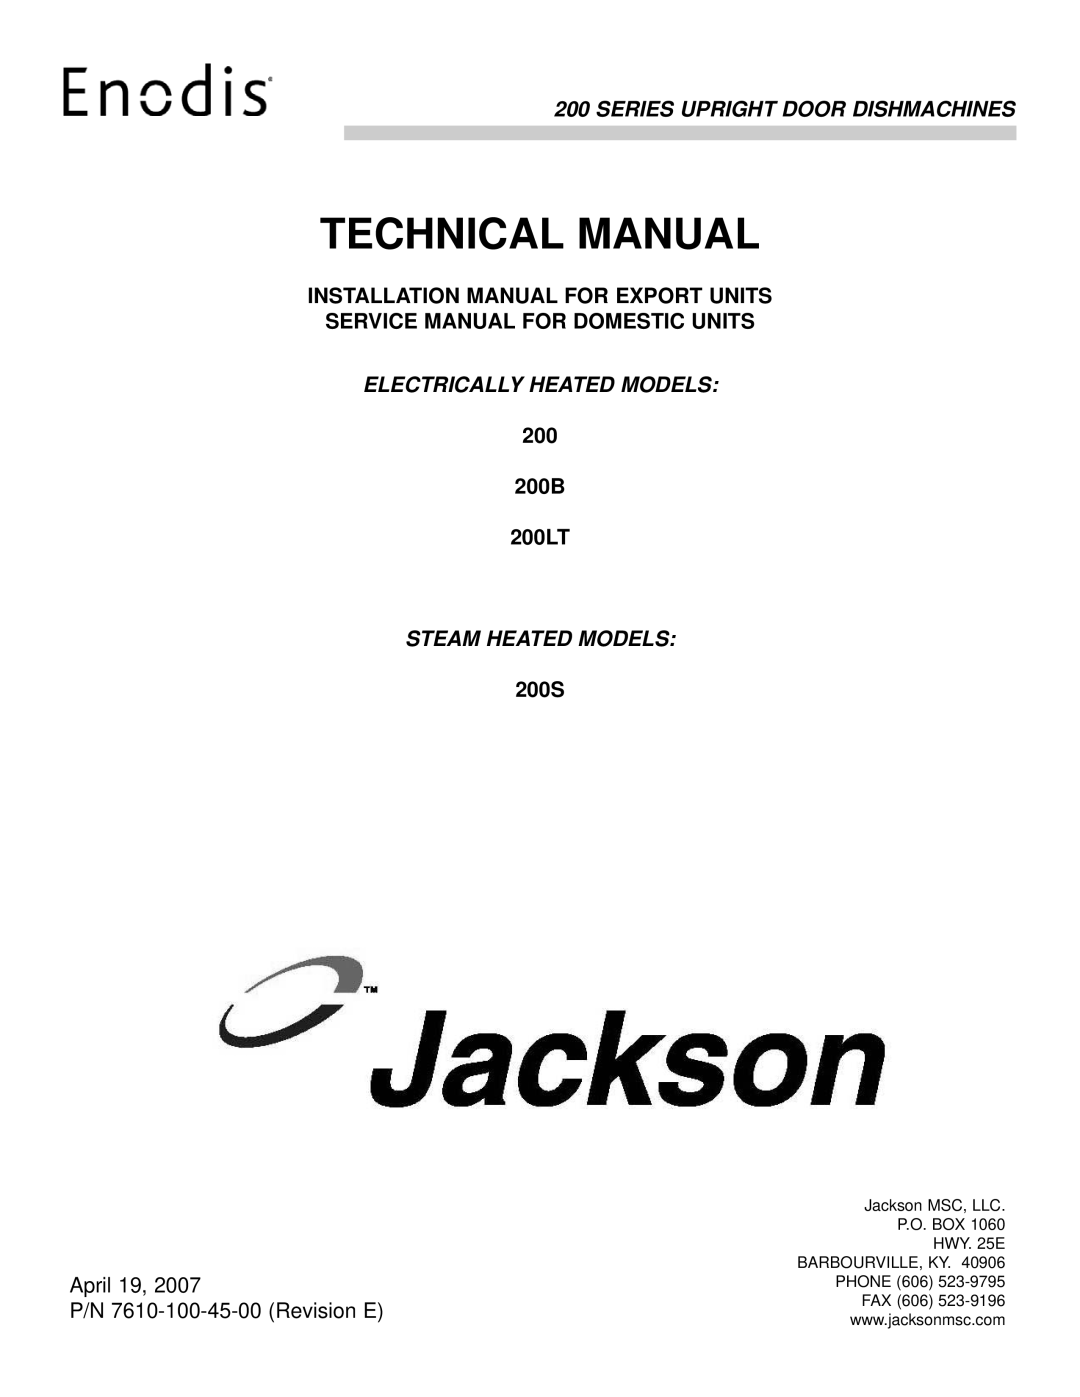 Jackson 200LT technical manual Technical Manual, Series Upright Door Dishmachines, Electrically Heated Models, 200S 